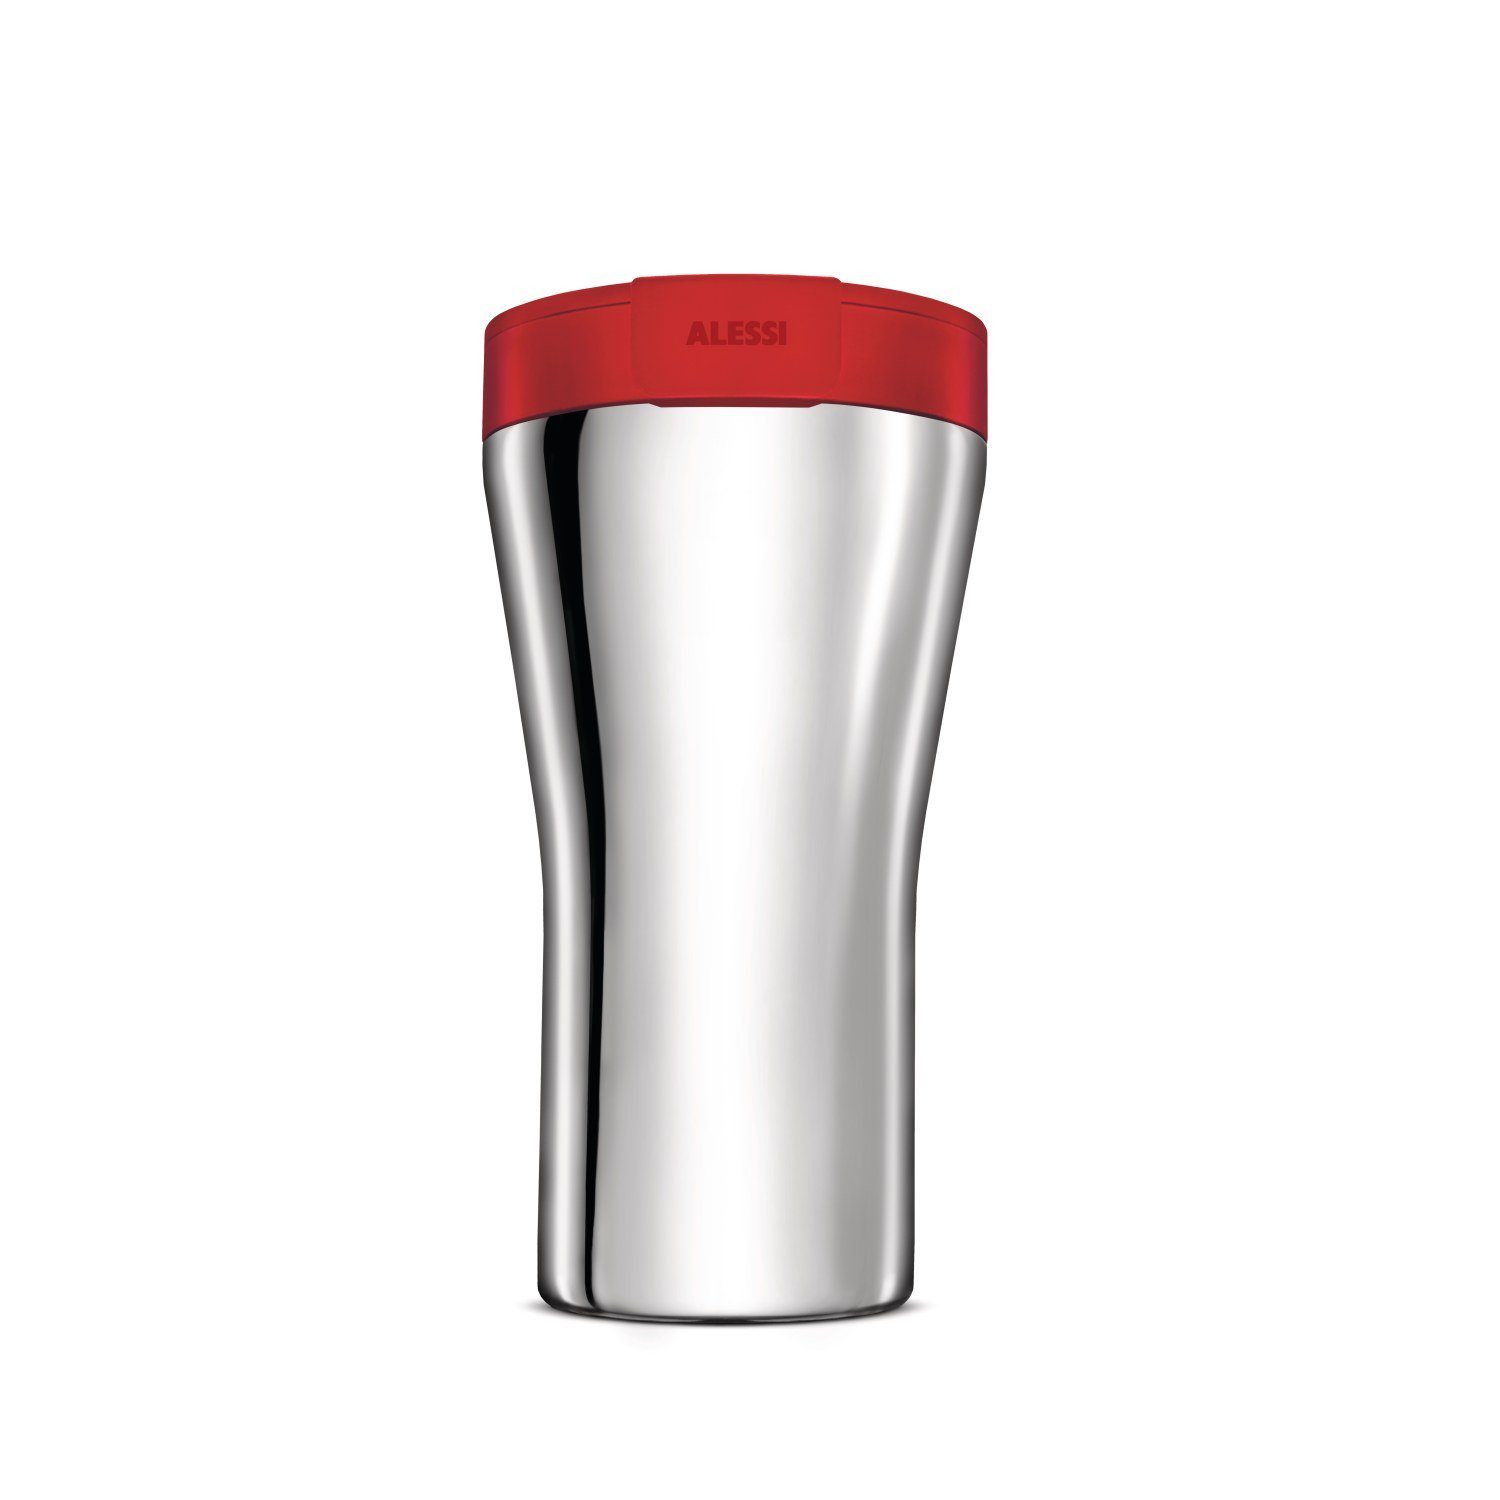 Alessi Thermobecher Caffa Rot, Edelstahl, thermoplastisches Harz | Thermobecher